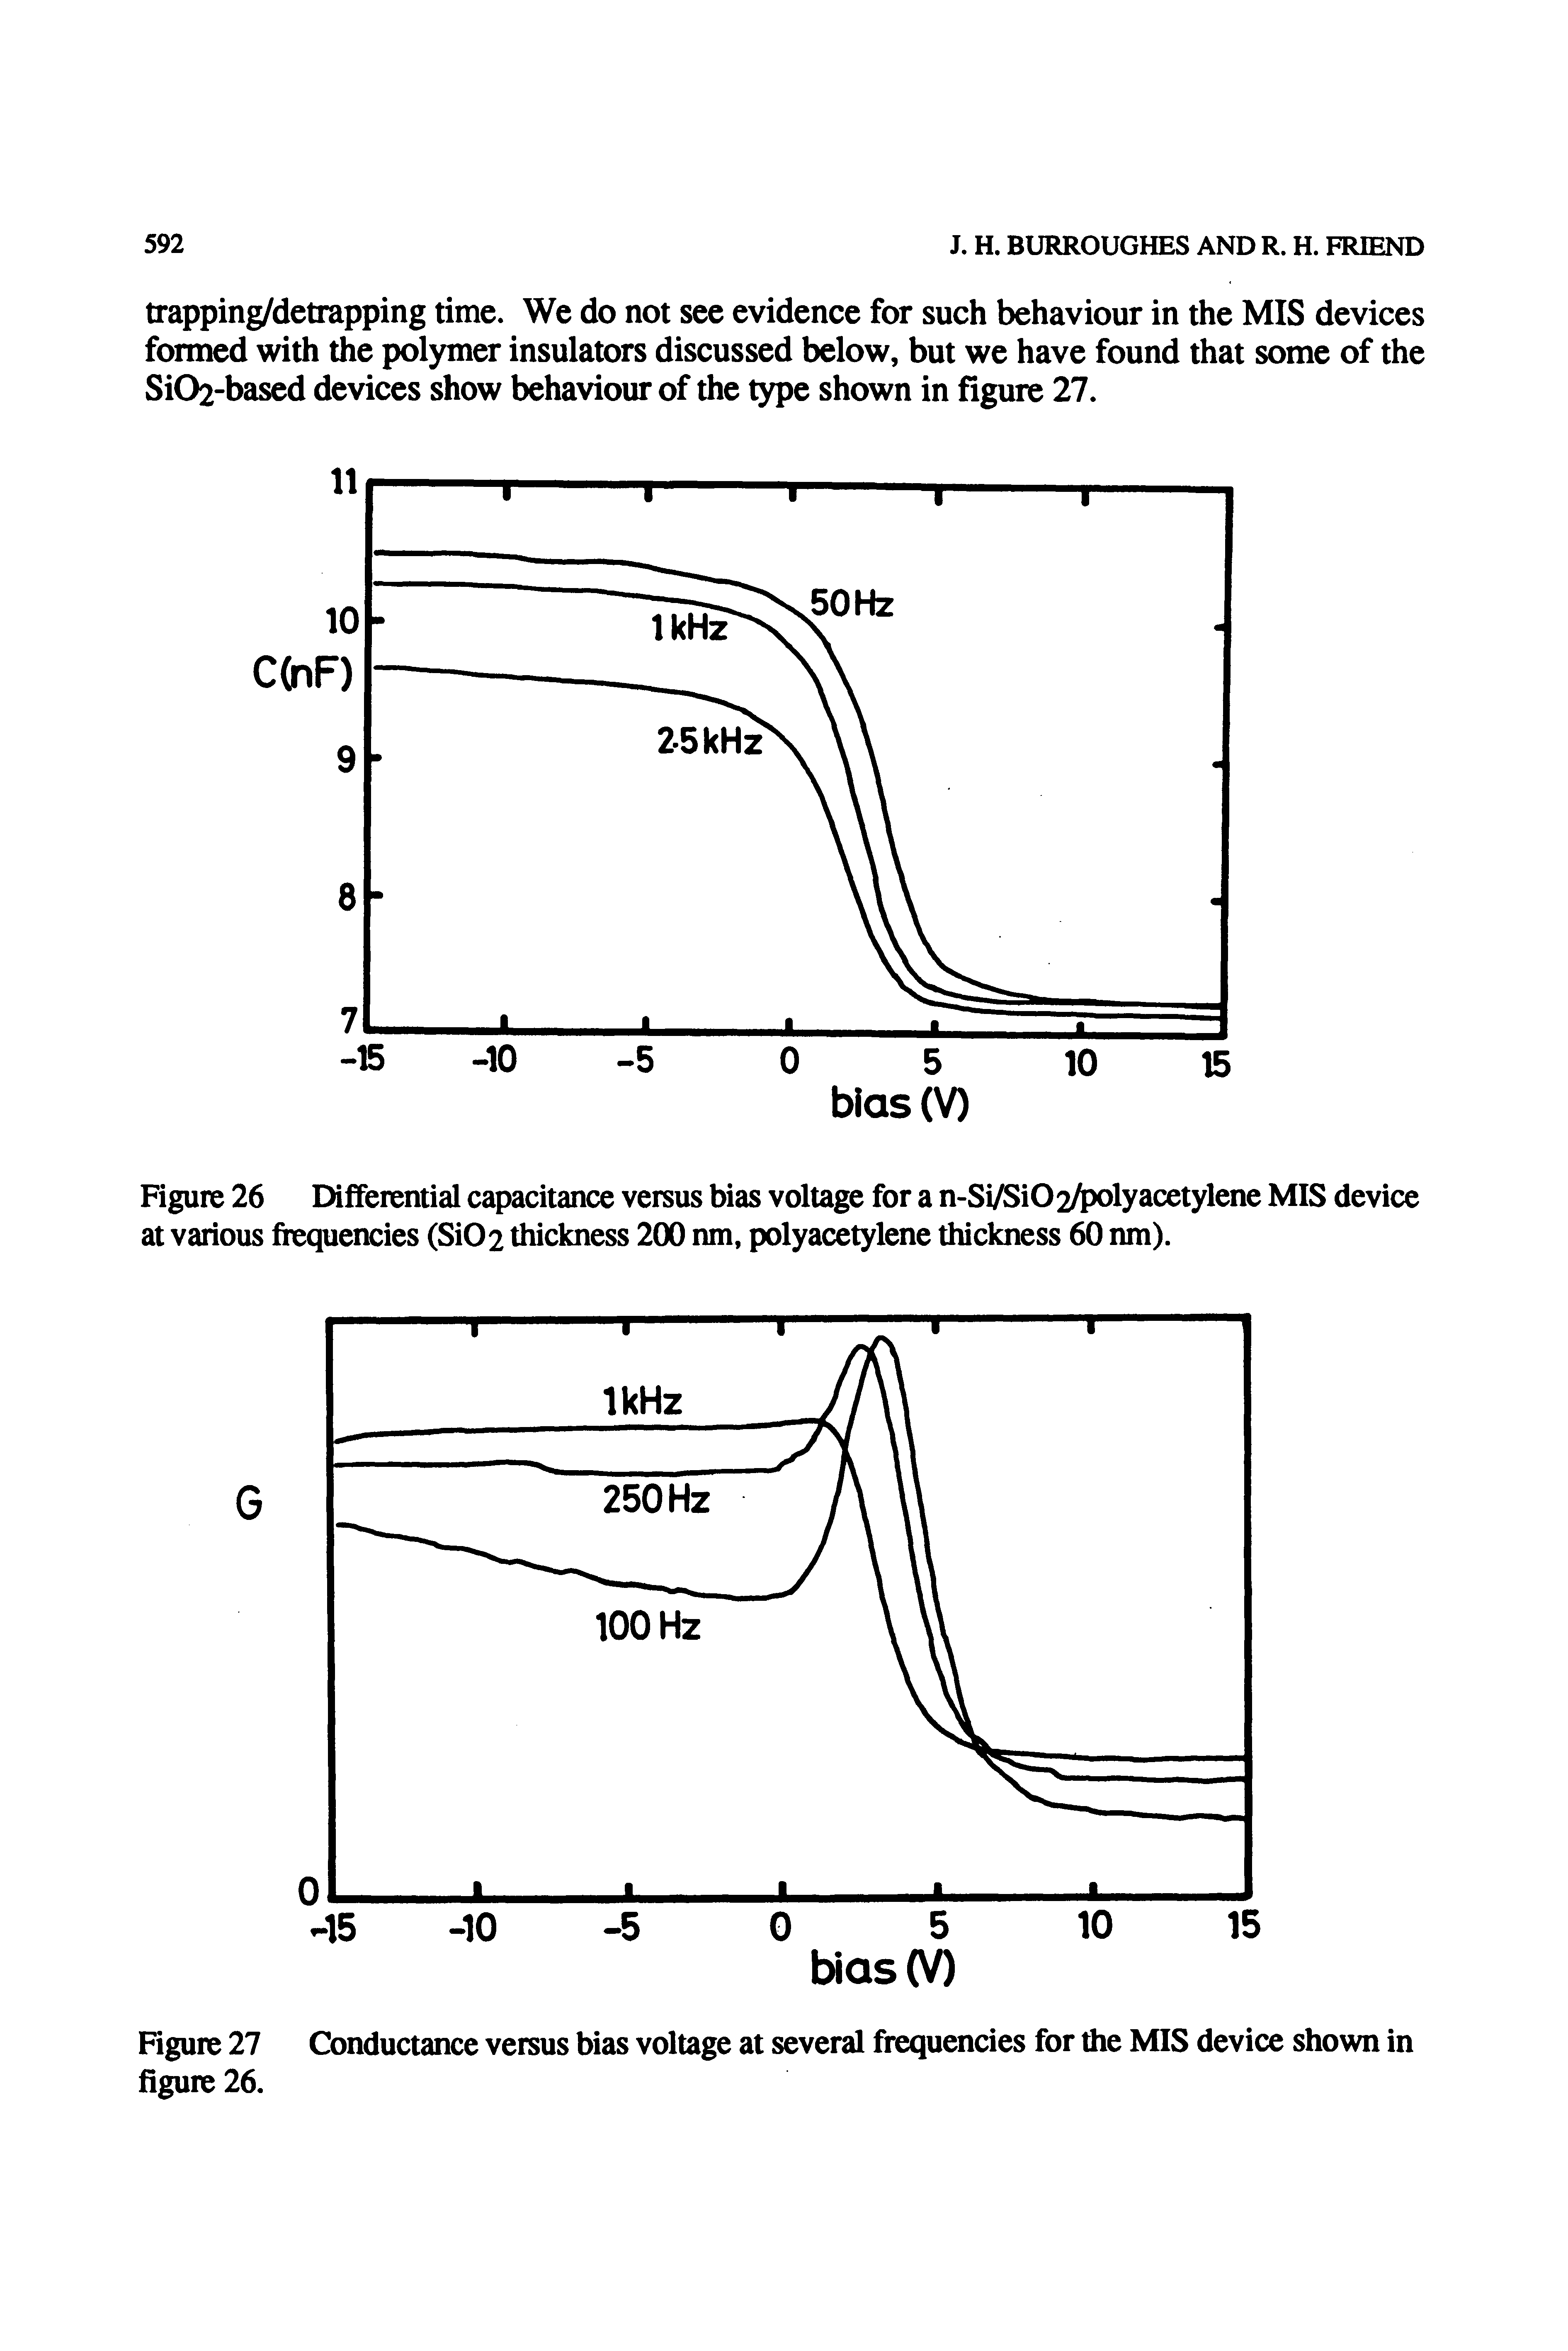 Figure 26 Differential capacitance versus bias voltage for a n-Si/Si02A>olyacetylene MIS device at various frequencies (Si02 thickness 200 nm, polyacetylene thickness 60 nm).